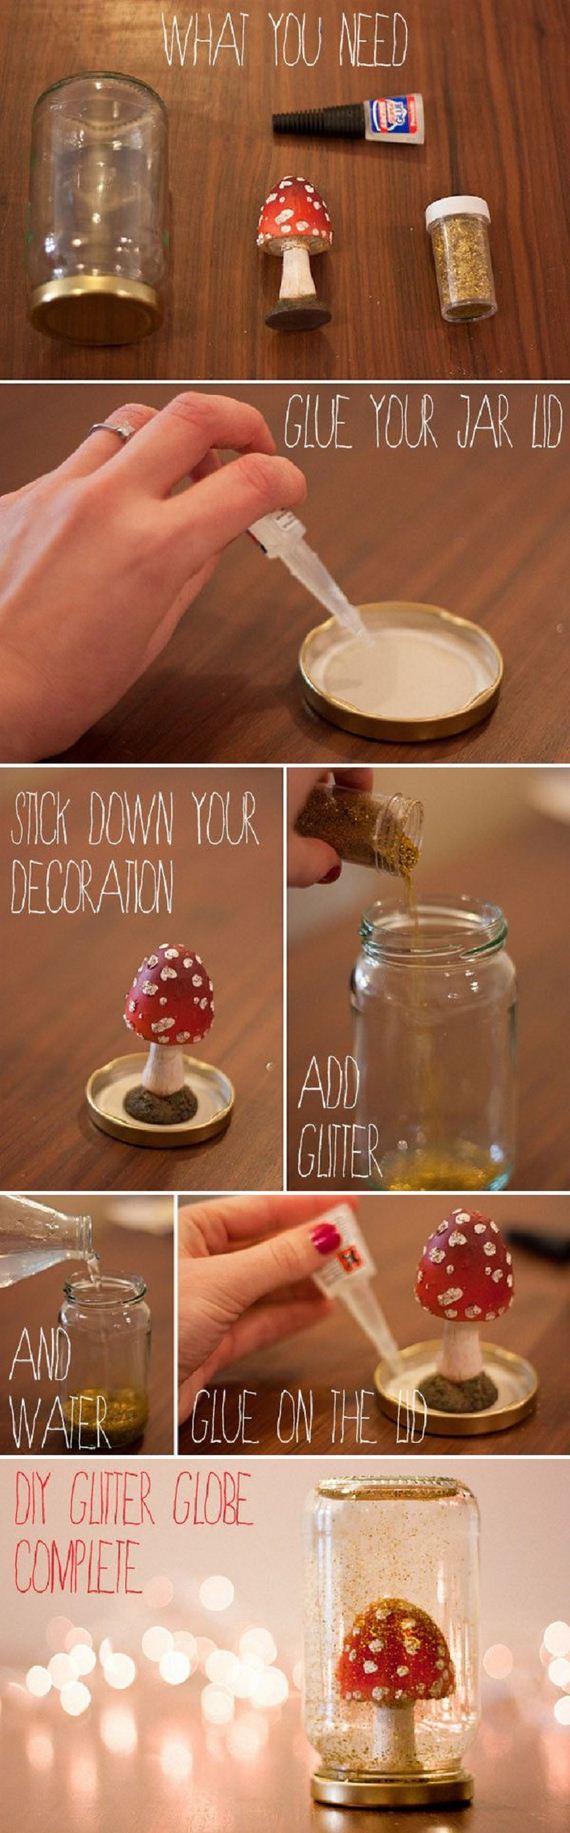 16-diy-home-craft-ideas-and-tips-thrifty-home-decor